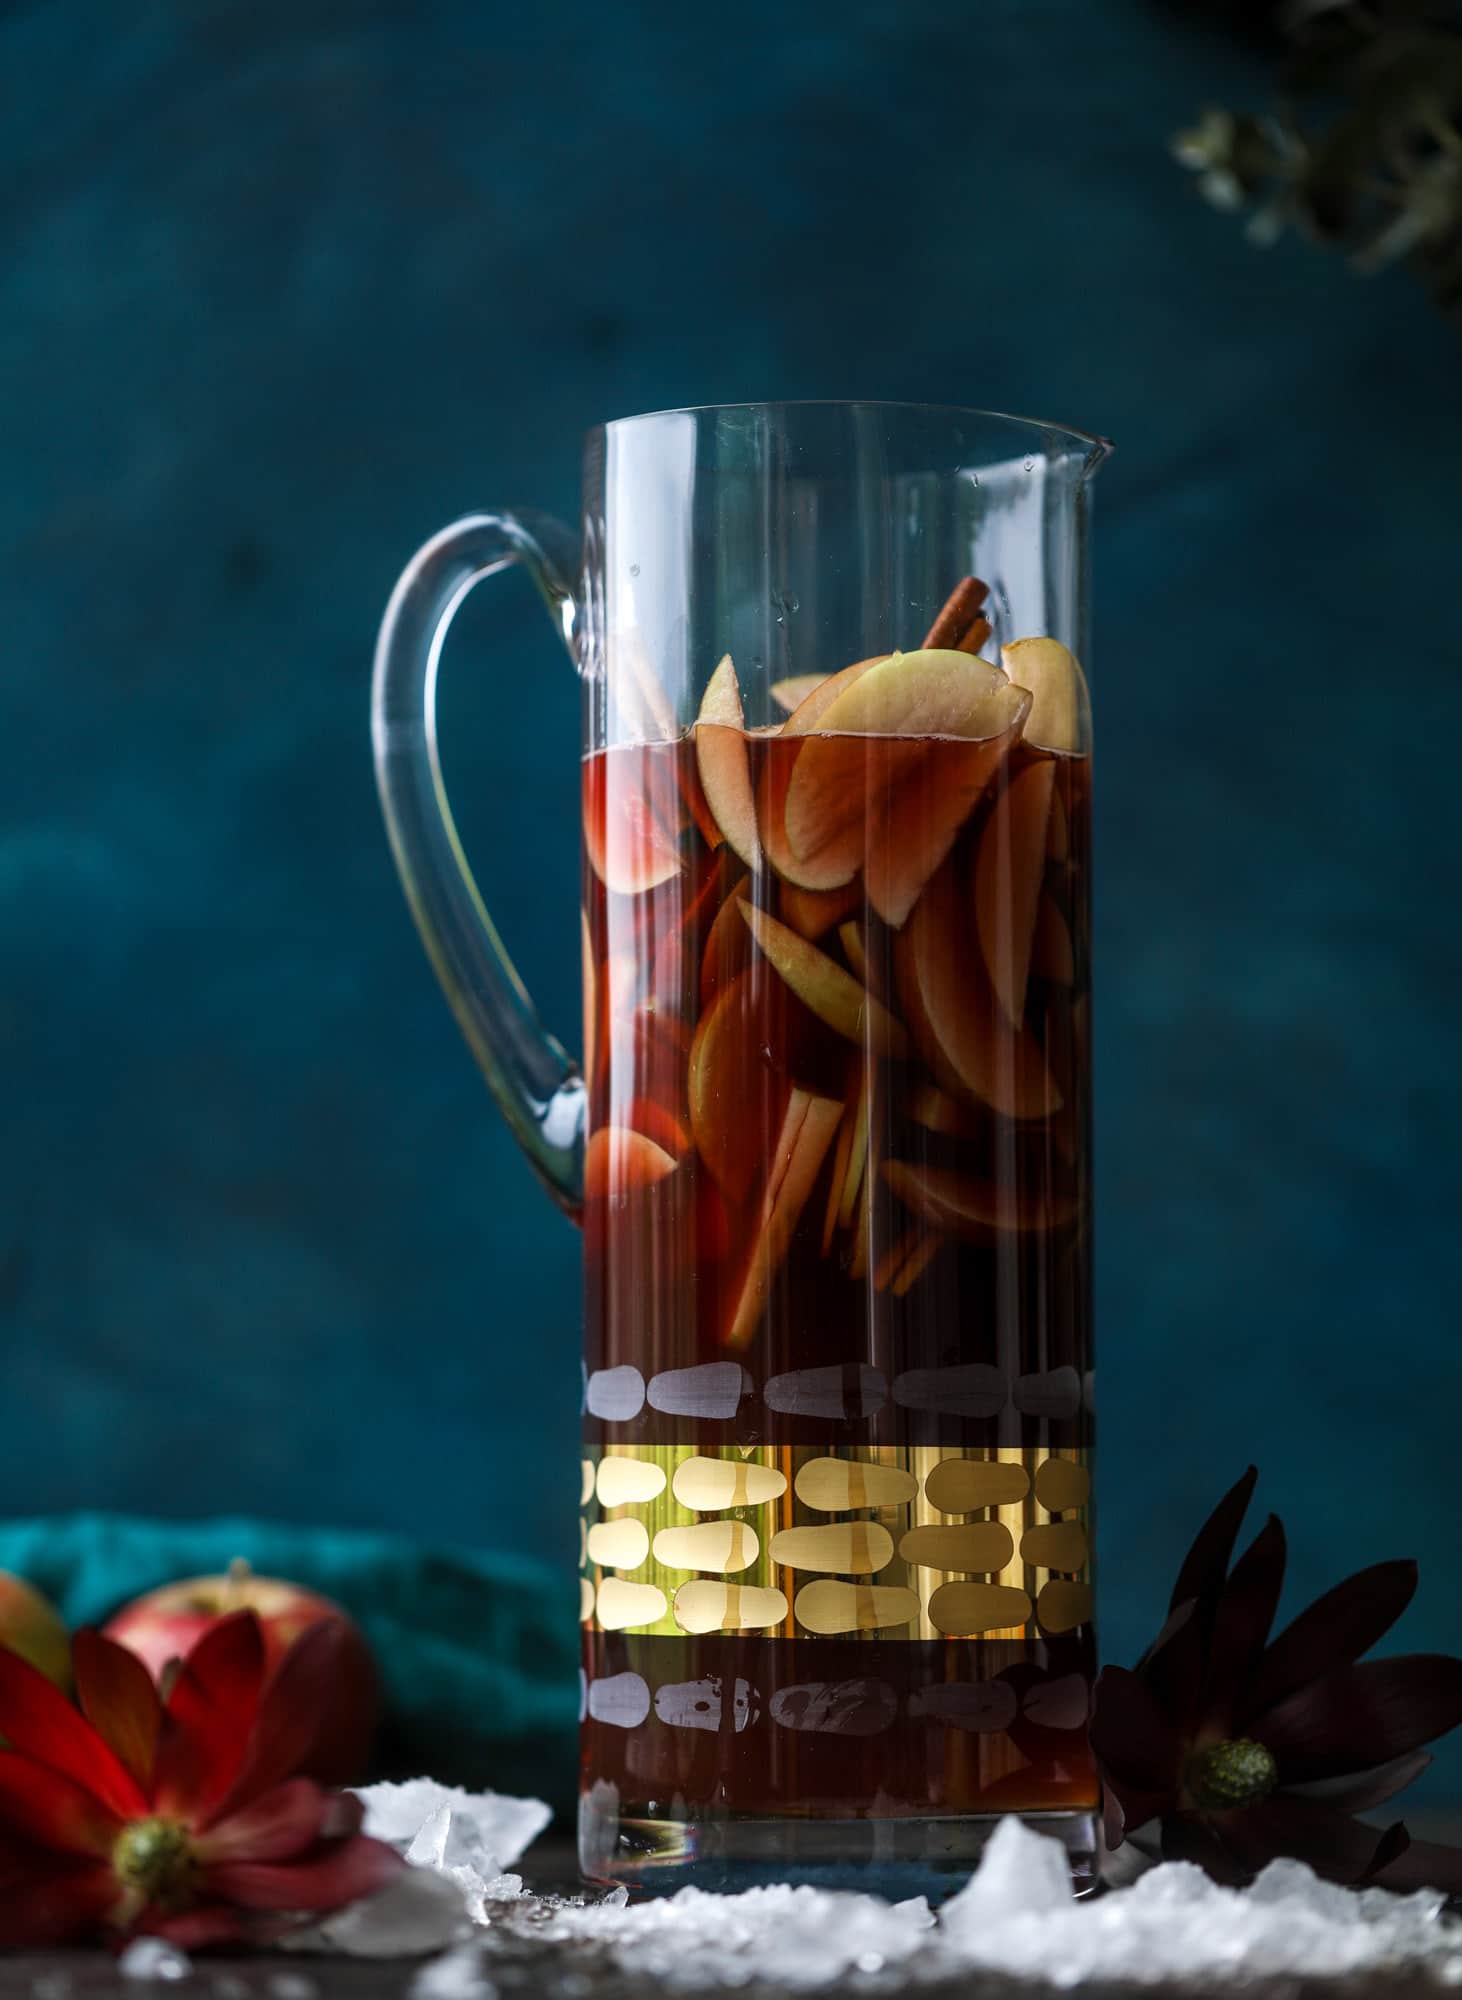 This red apple cider sangria will soon because a staple for your fall! It's delicious and not too sweet, with a base of red wine, apple cider and maple syrup. Cinnamon sticks and apple slices round out the pitcher and it's so flavorful and perfect for the season! I howsweeteats.com #red #apple #cider #sangria 